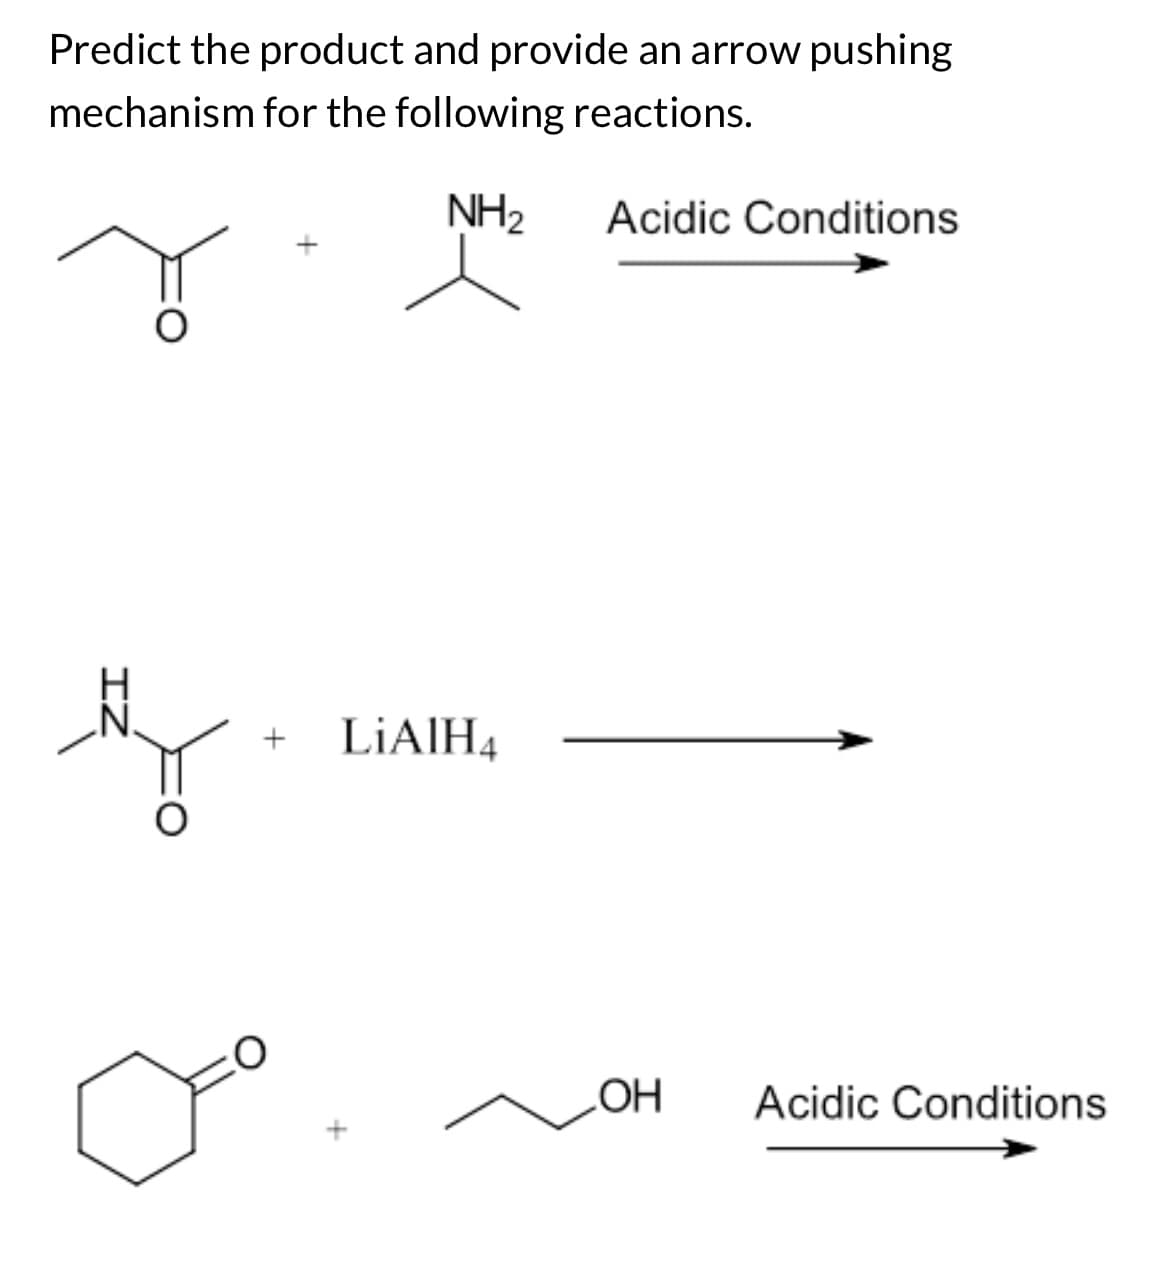 ZI
D
Predict the product and provide an arrow pushing
mechanism for the following reactions.
+
LiAlH4
NH2
Acidic Conditions
OH
Acidic Conditions